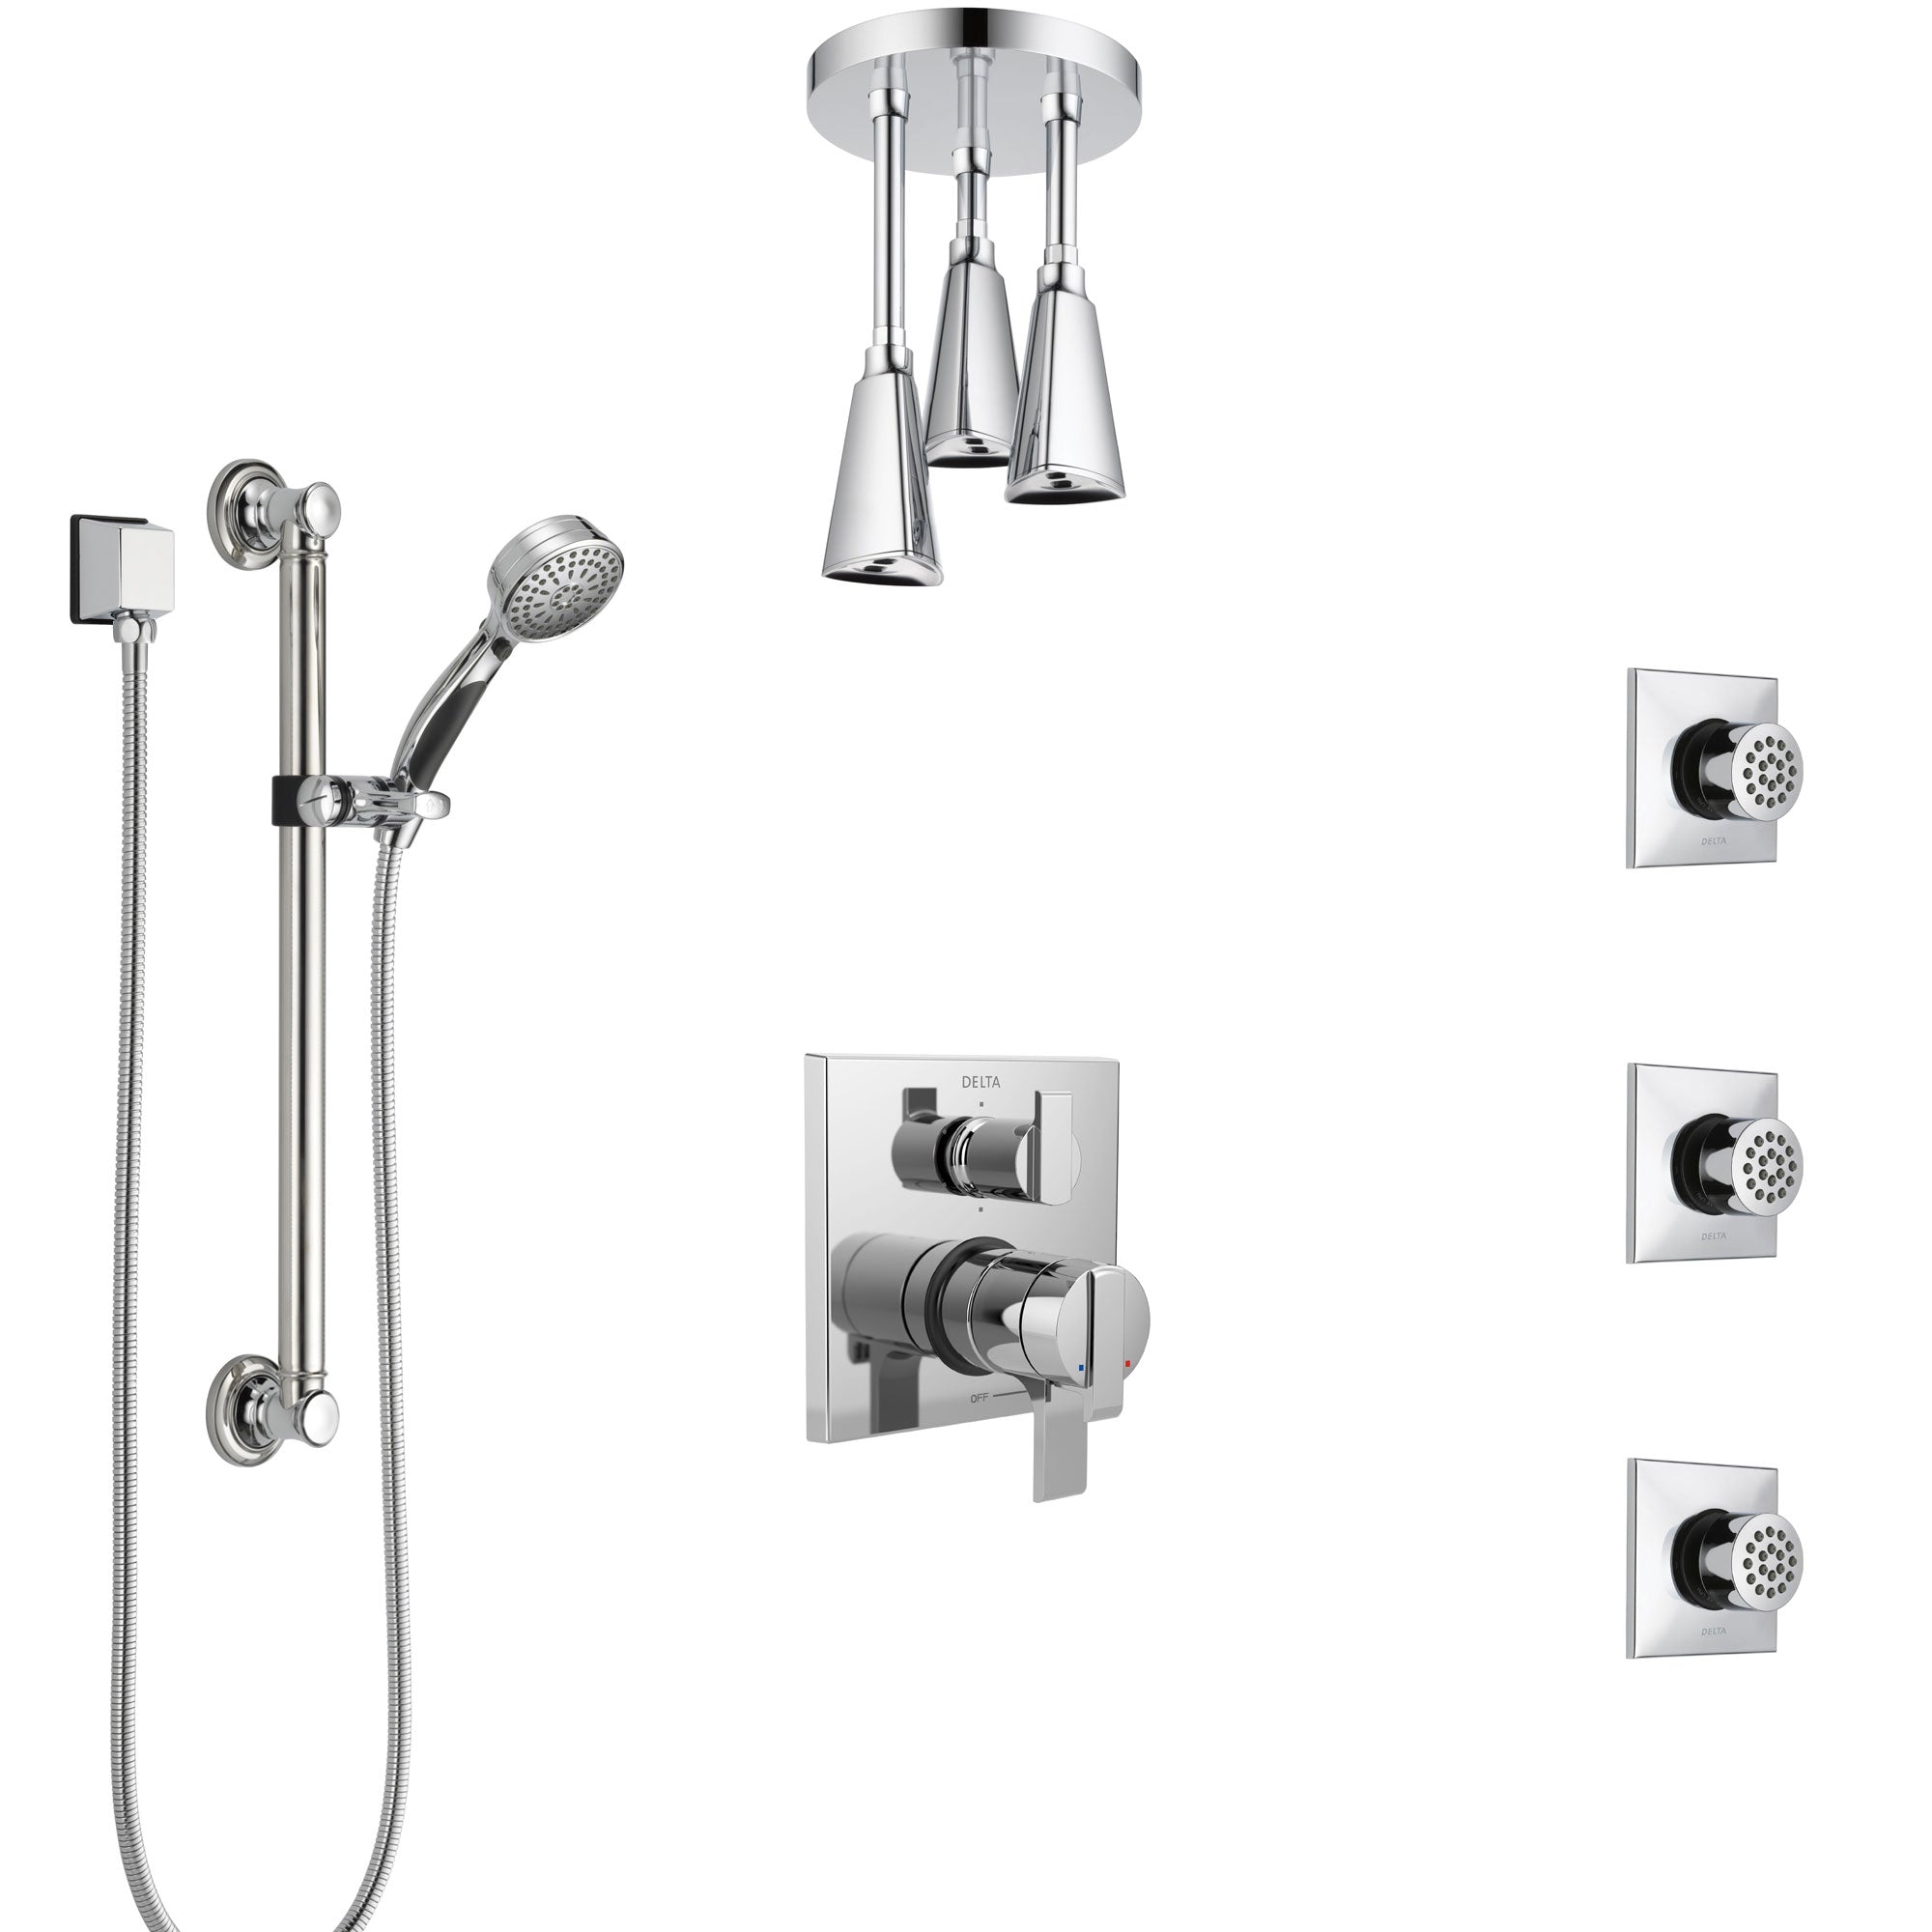 Delta Ara Chrome Shower System with Dual Control Handle, Integrated Diverter, Ceiling Showerhead, 3 Body Sprays, and Grab Bar Hand Shower SS279674